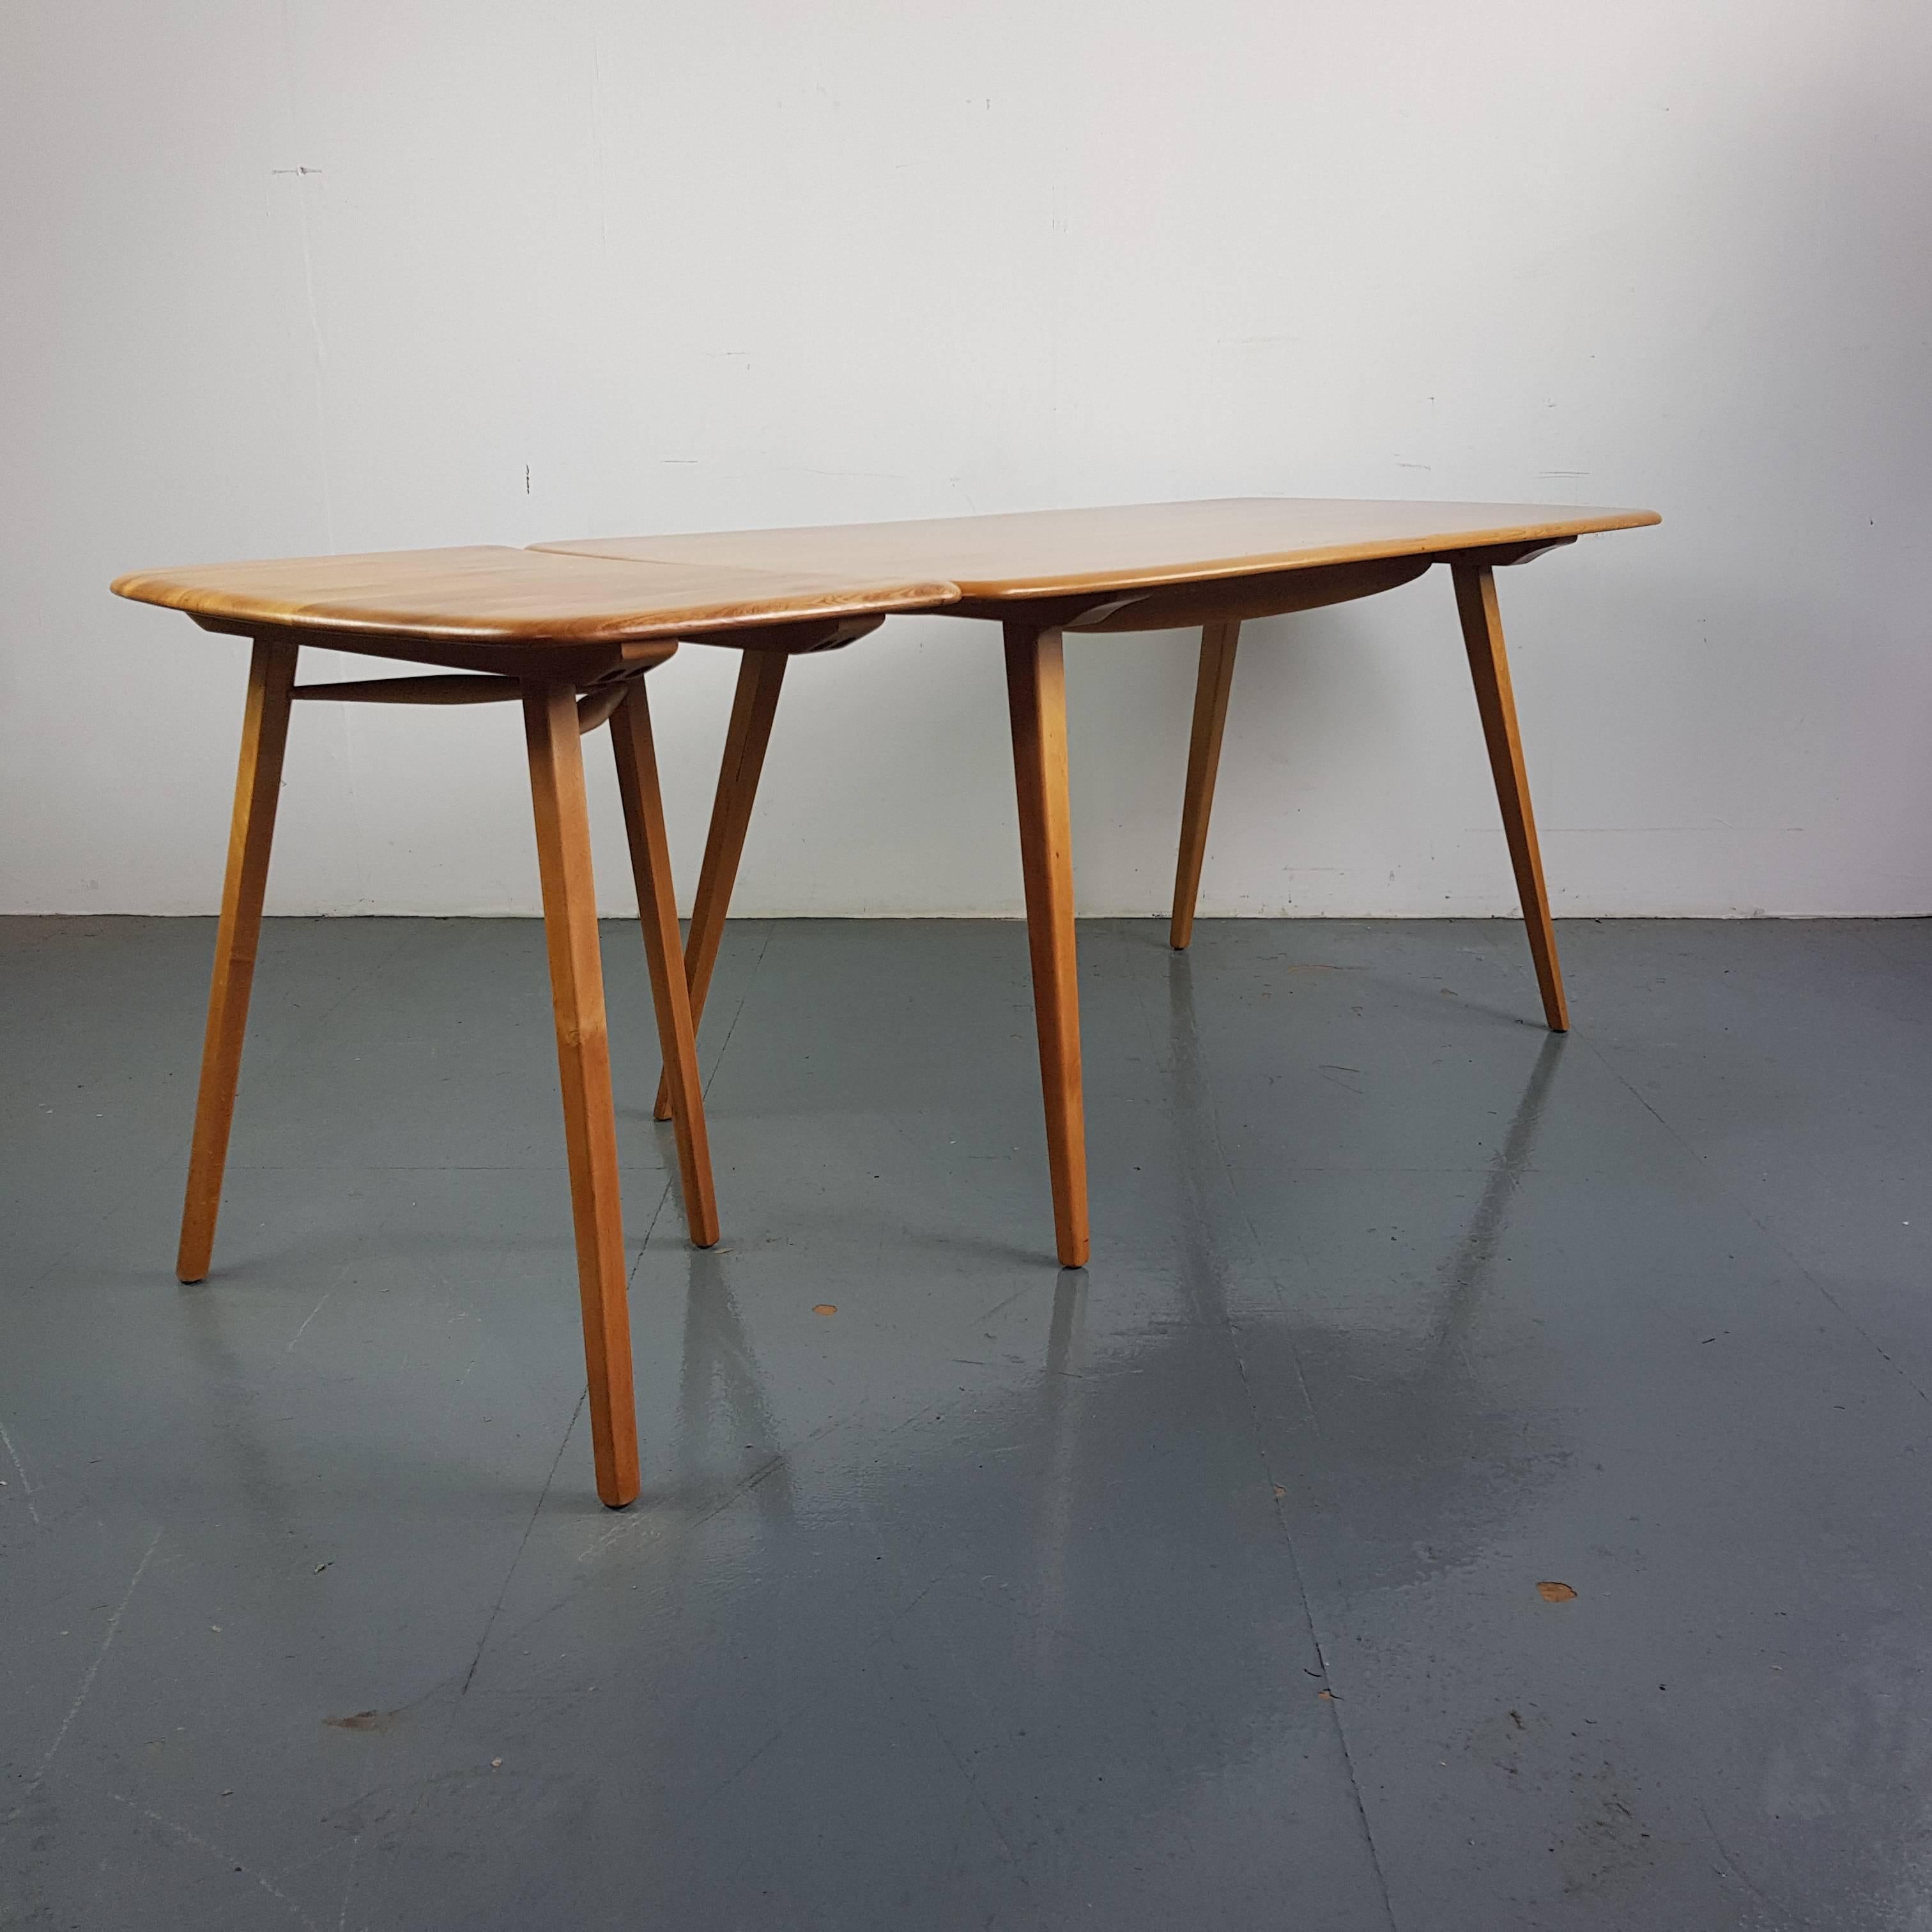 Vintage Midcentury British Ercol Desk Extension for the Plank Dining Table In Good Condition For Sale In Lewes, East Sussex